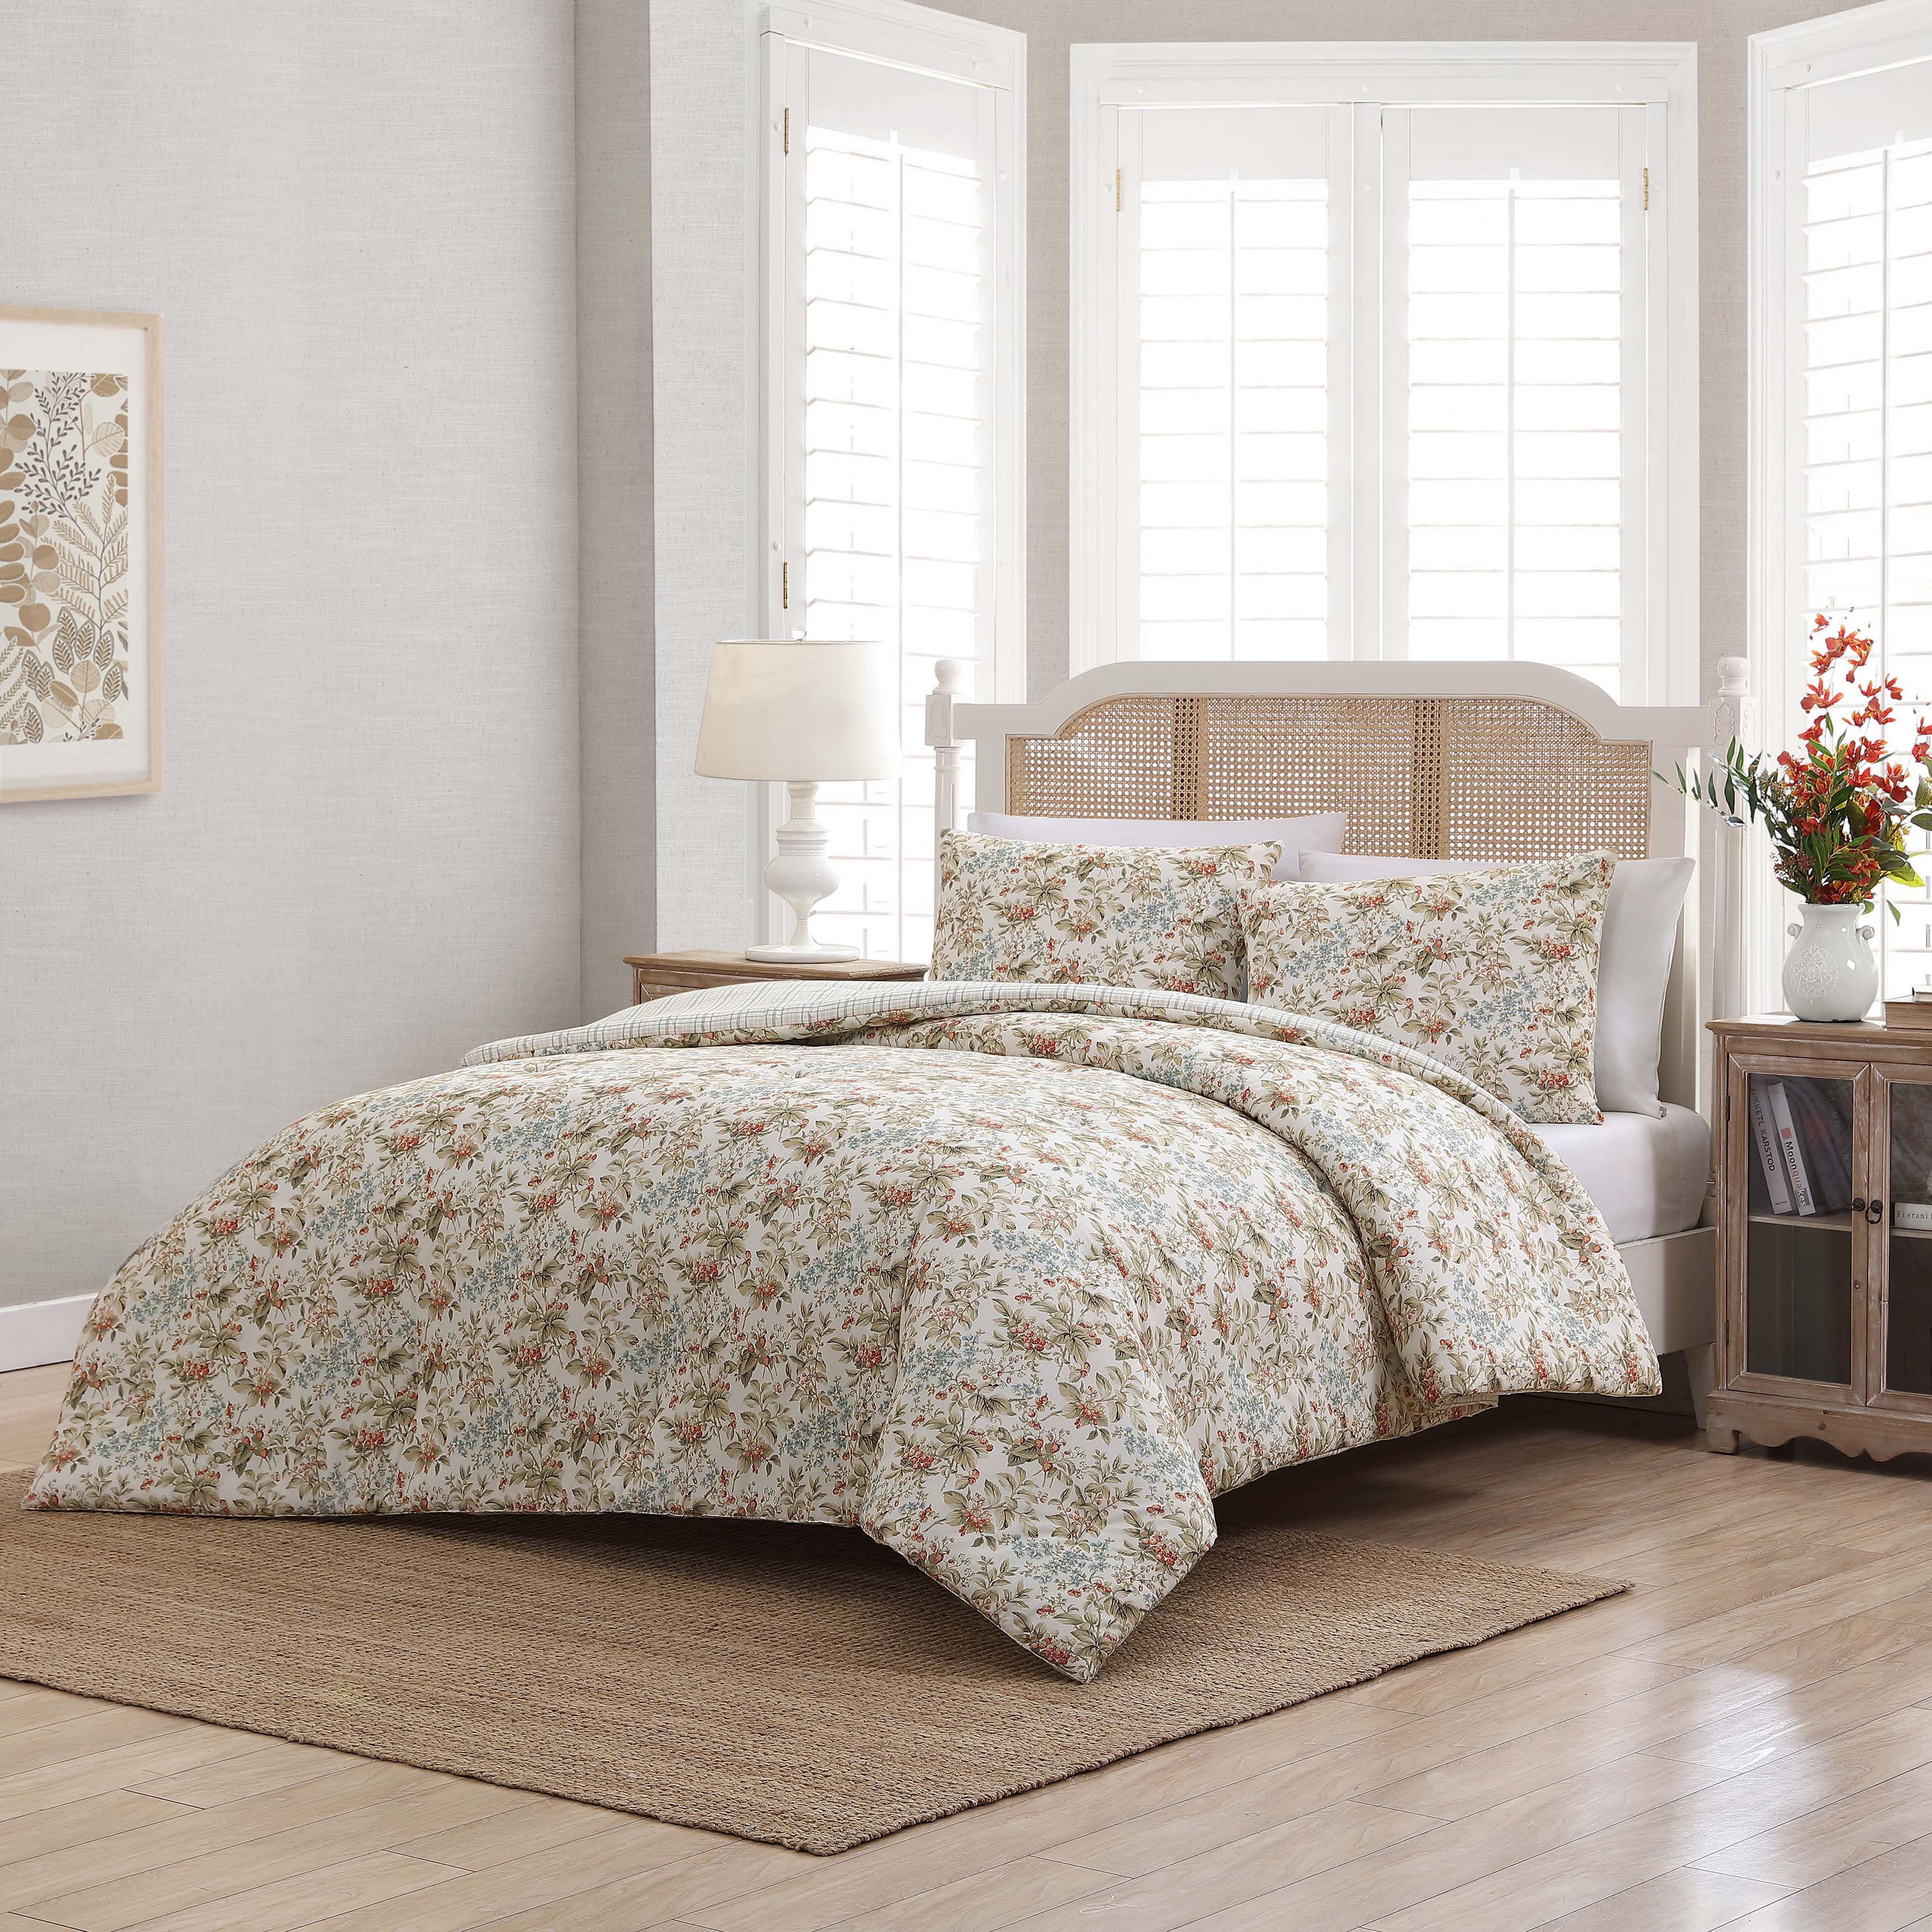 Laura Ashley Madelynn 7-Piece Blue Floral Cotton King Comforter